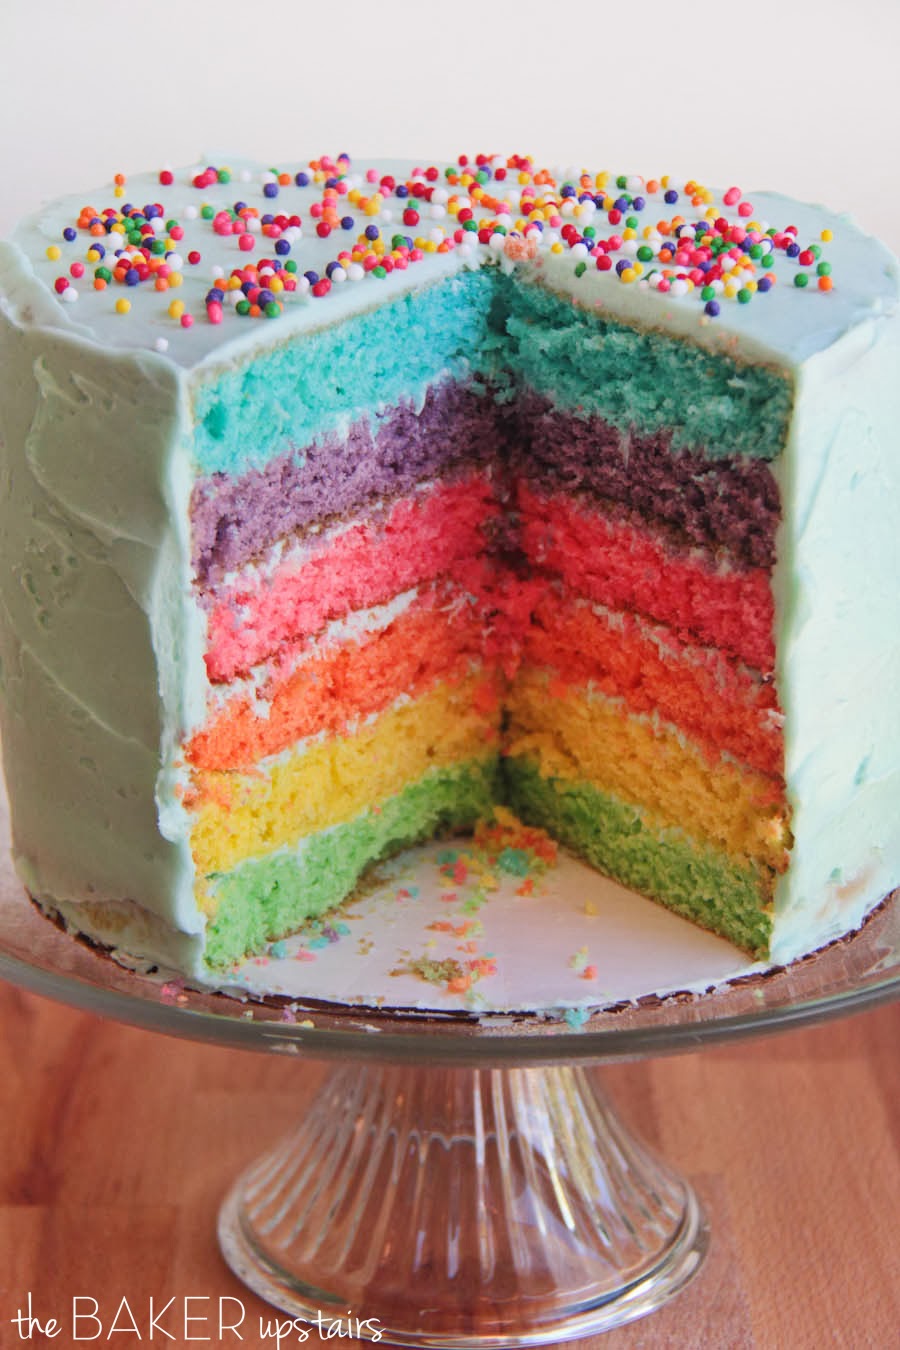 This six layer rainbow cake is colorful way to brighten up your birthday!